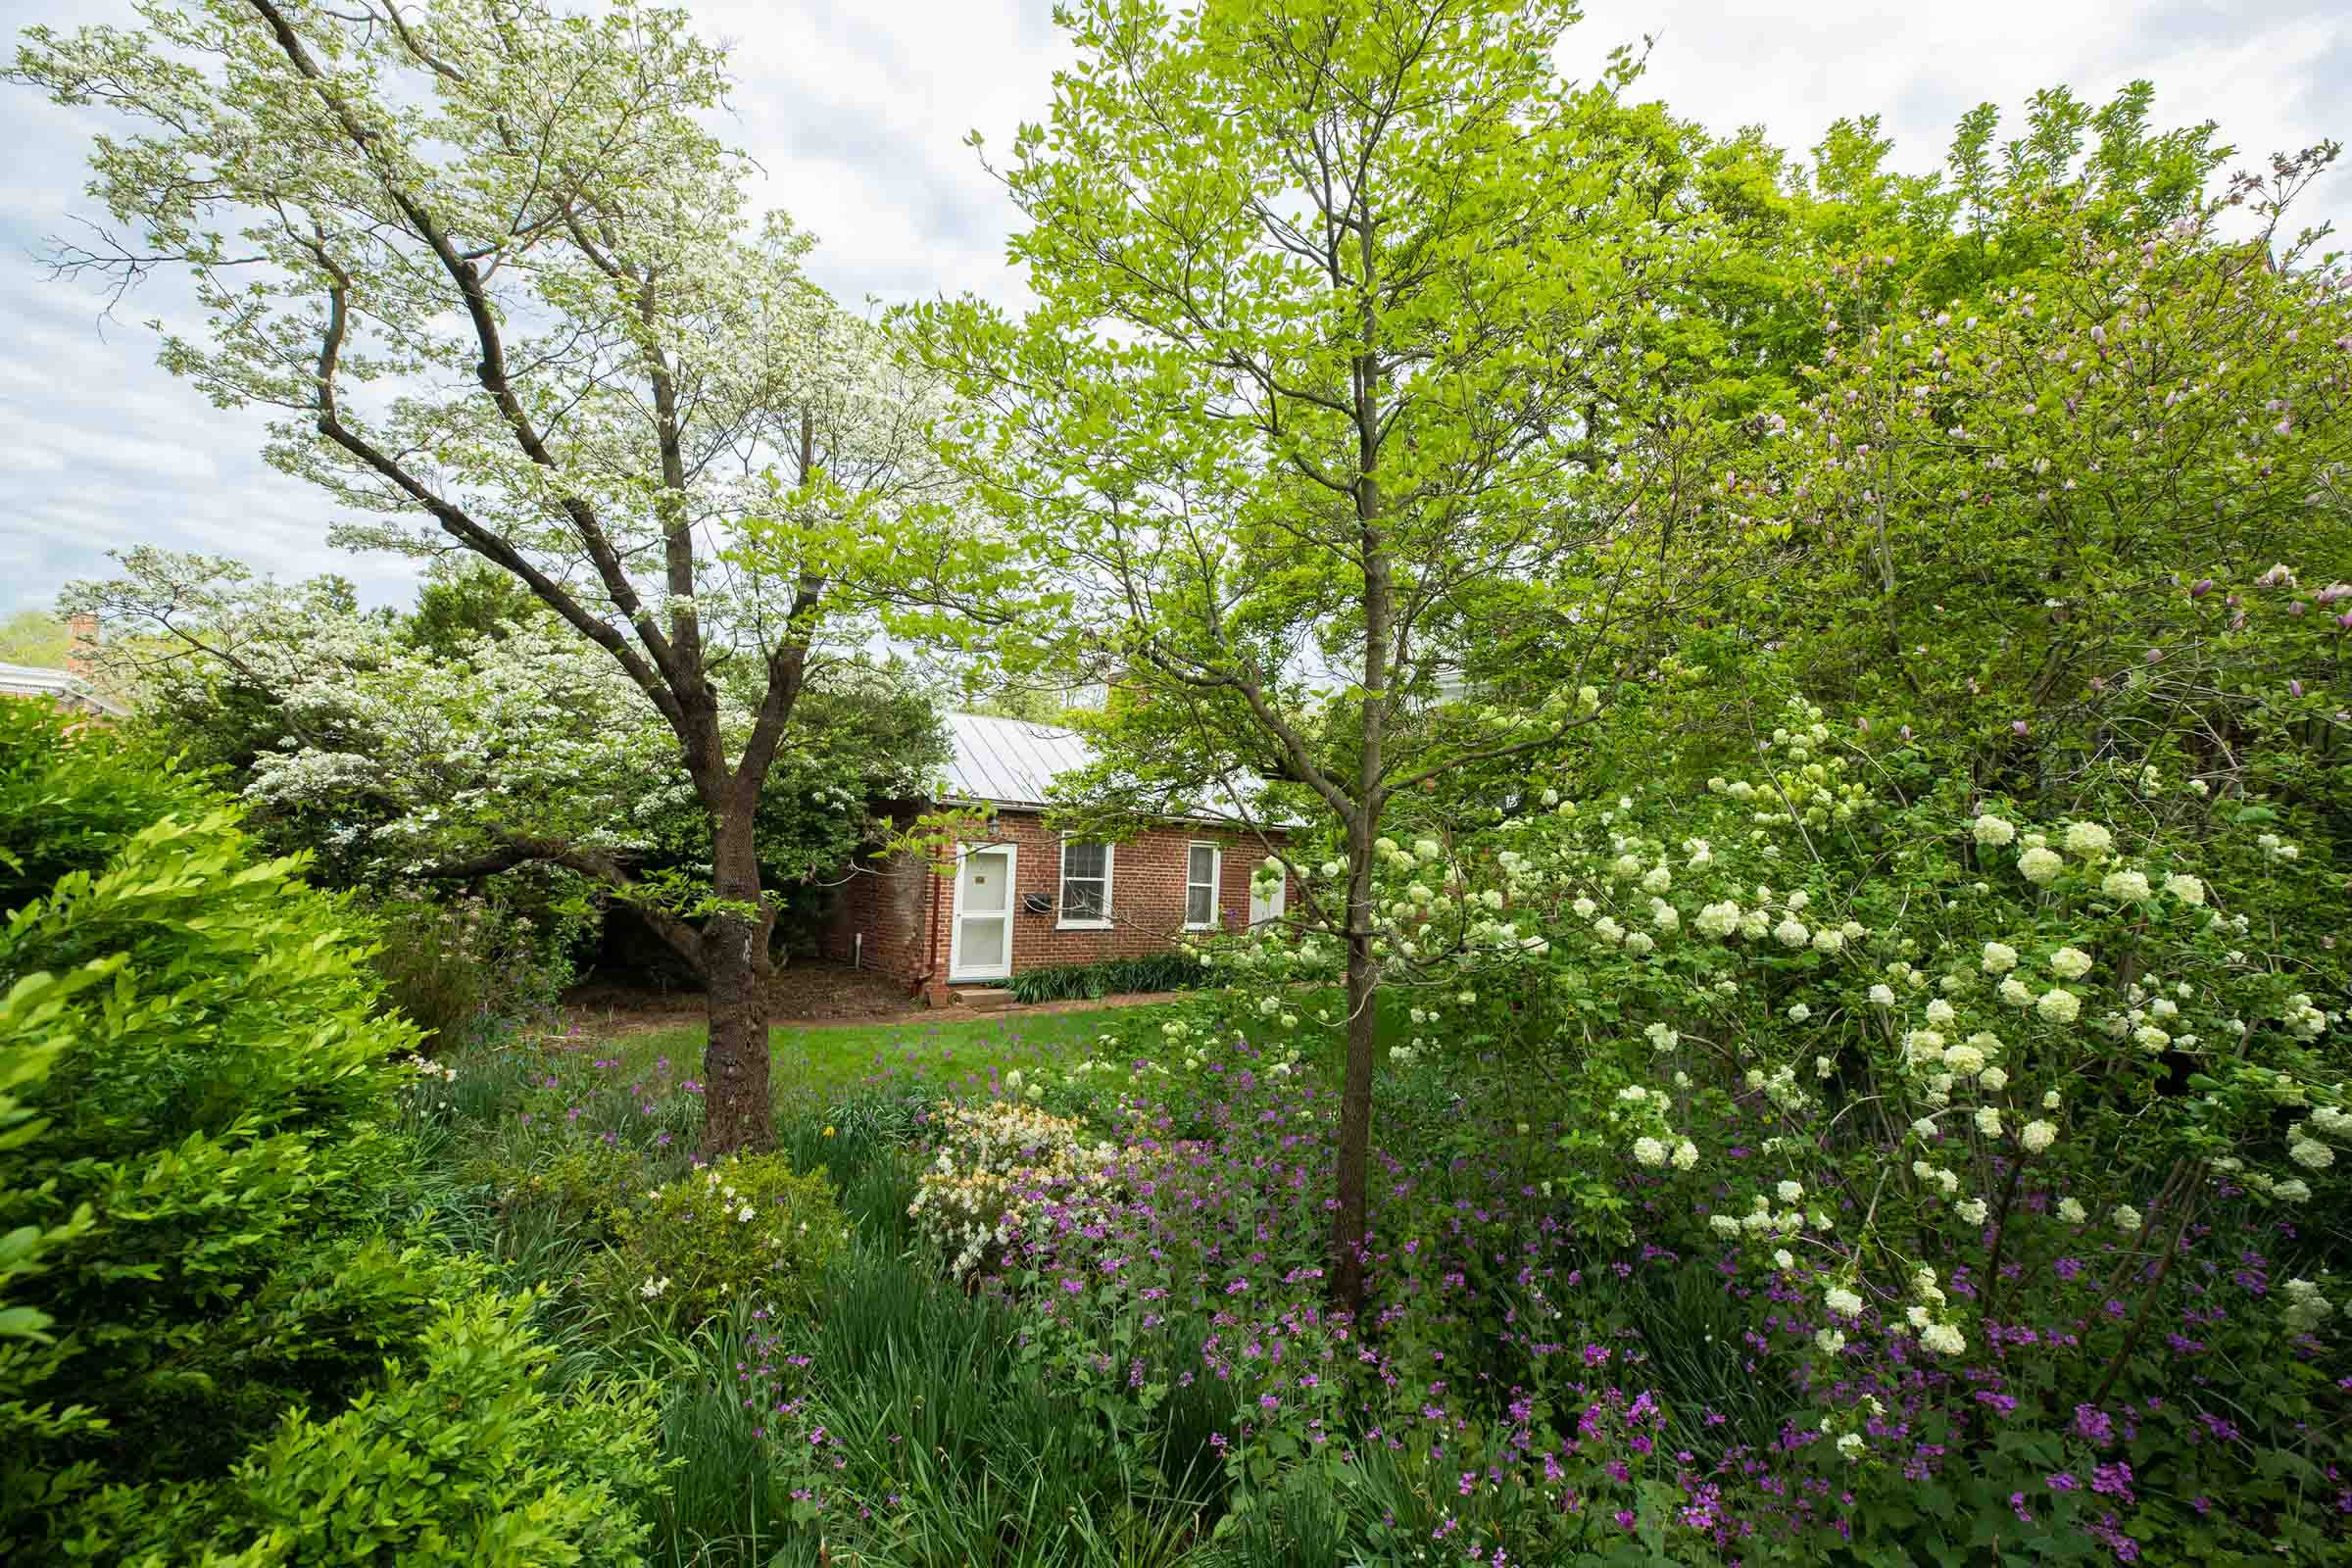 Small brick house in the background with blooming trees and flowers